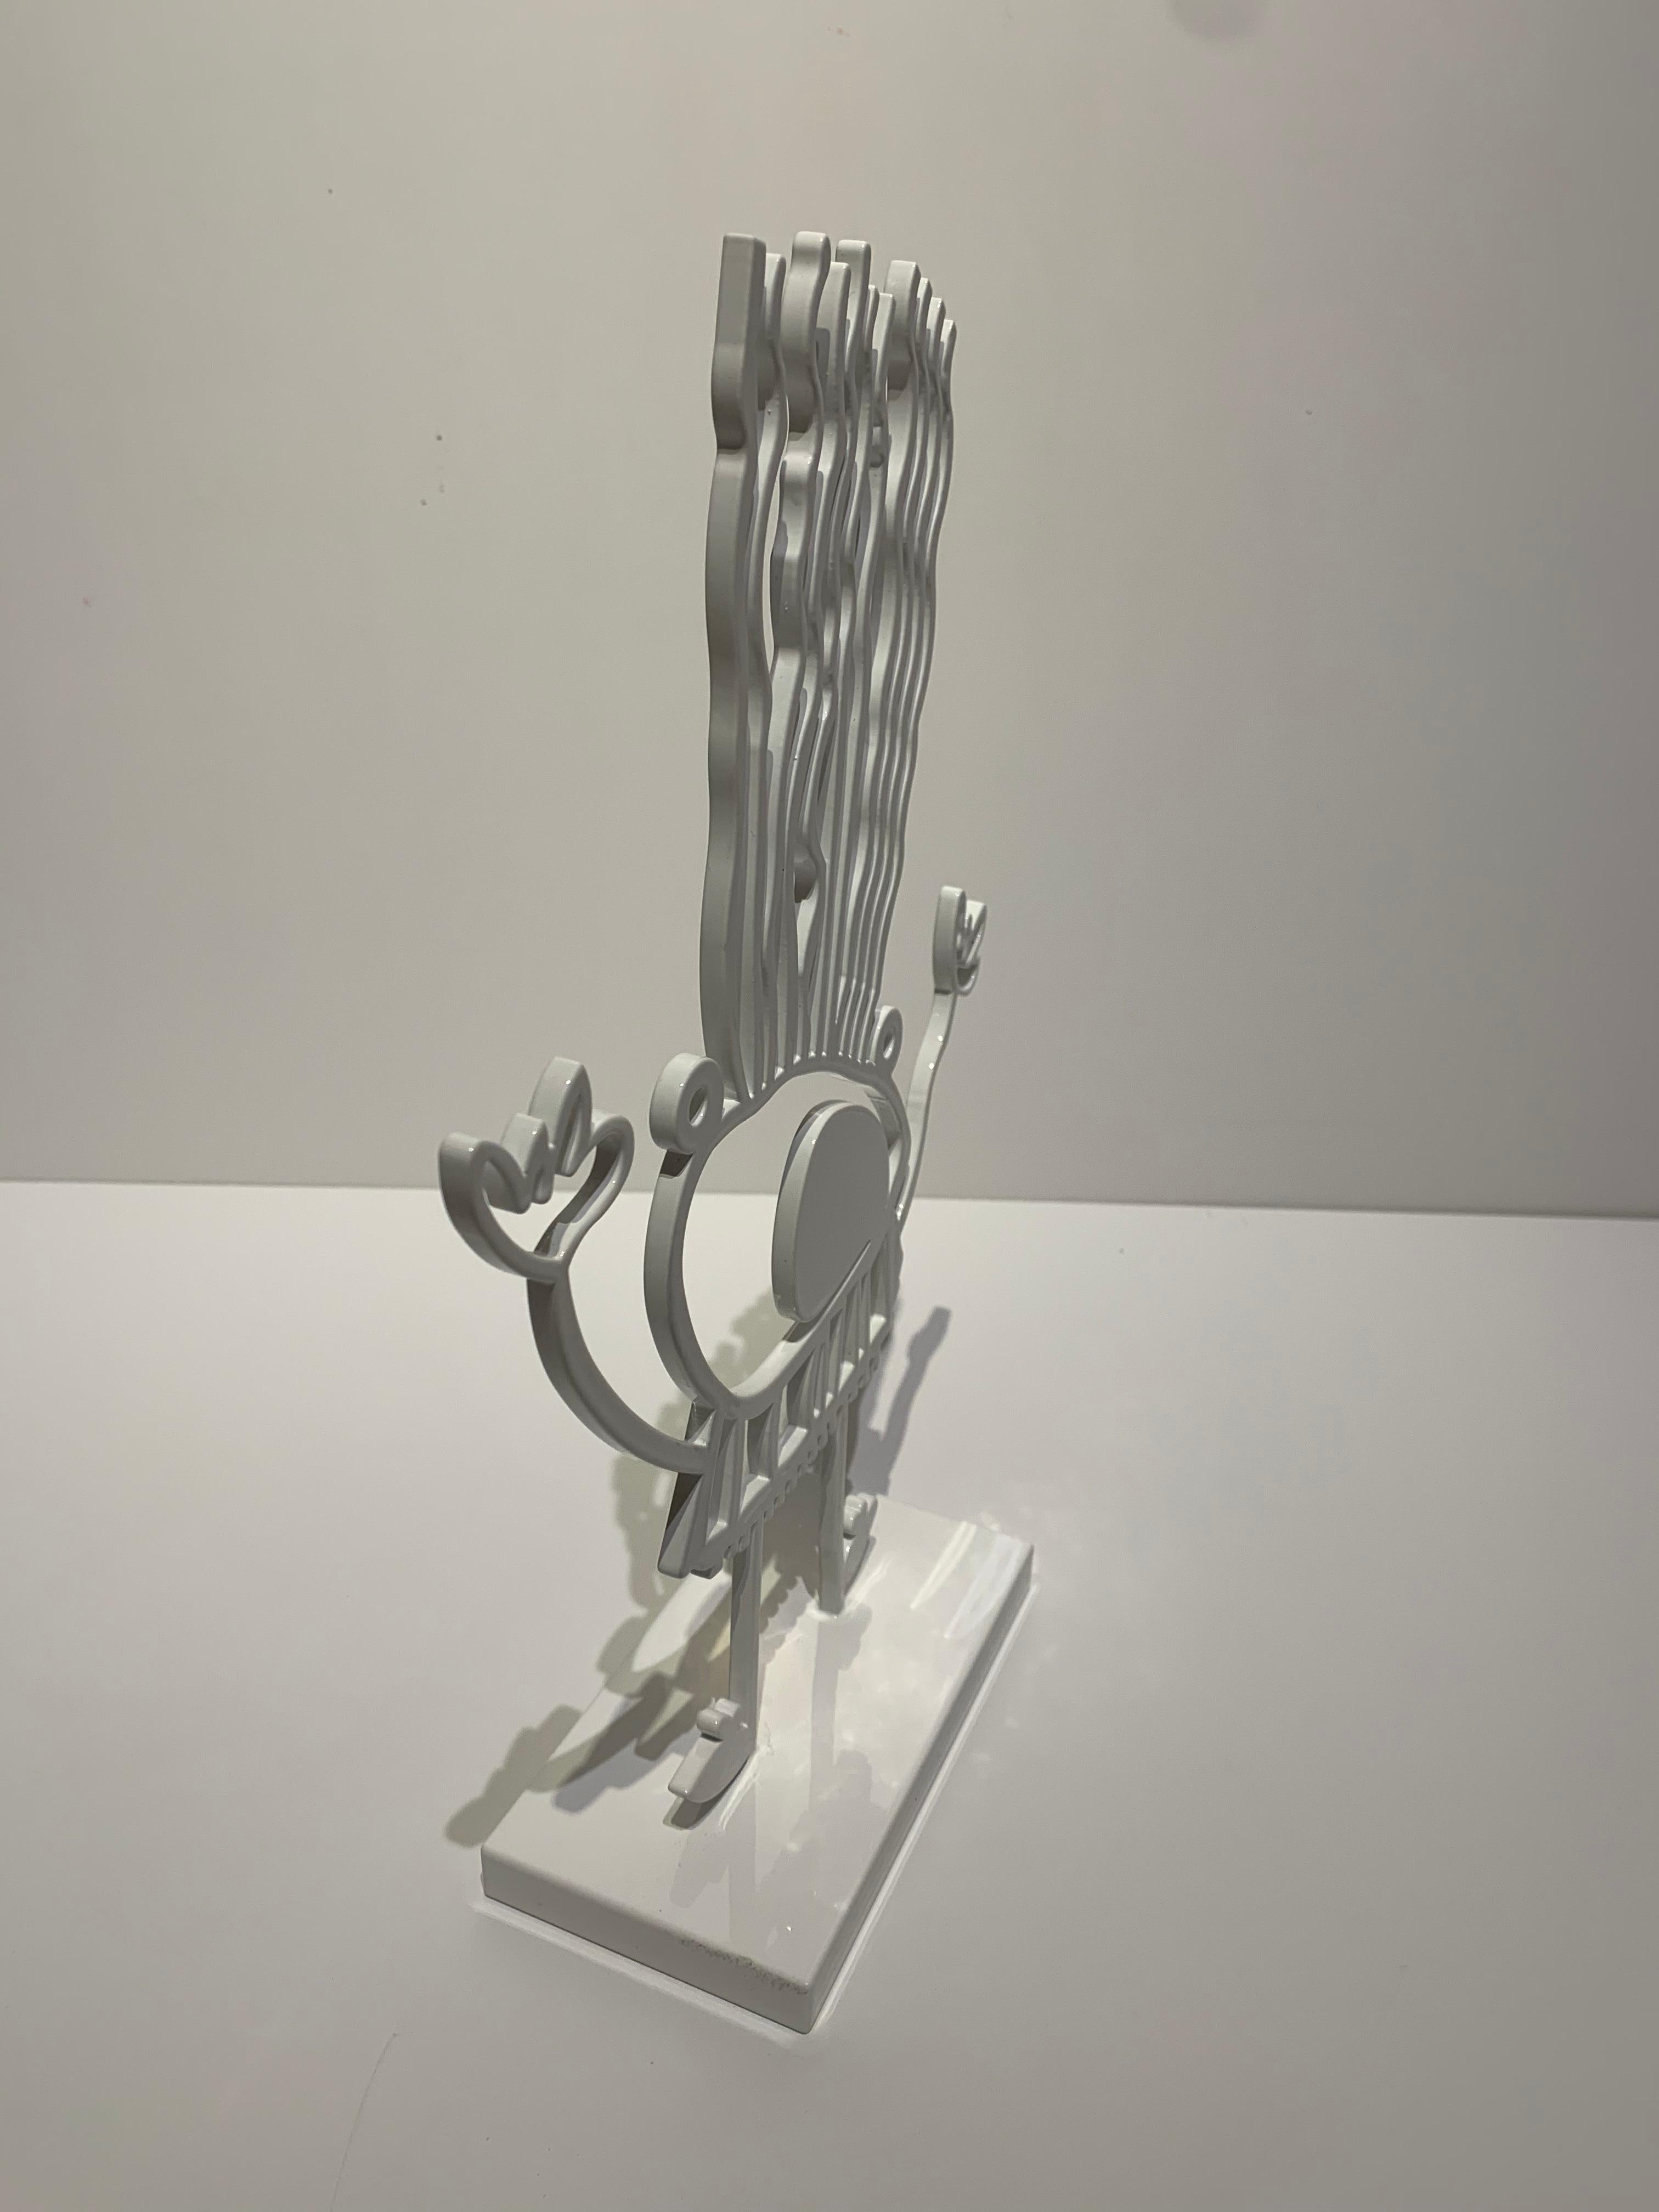 Xavi Carbonell, Untitled 2019, White Painted Metal Sculpture 2/25 1